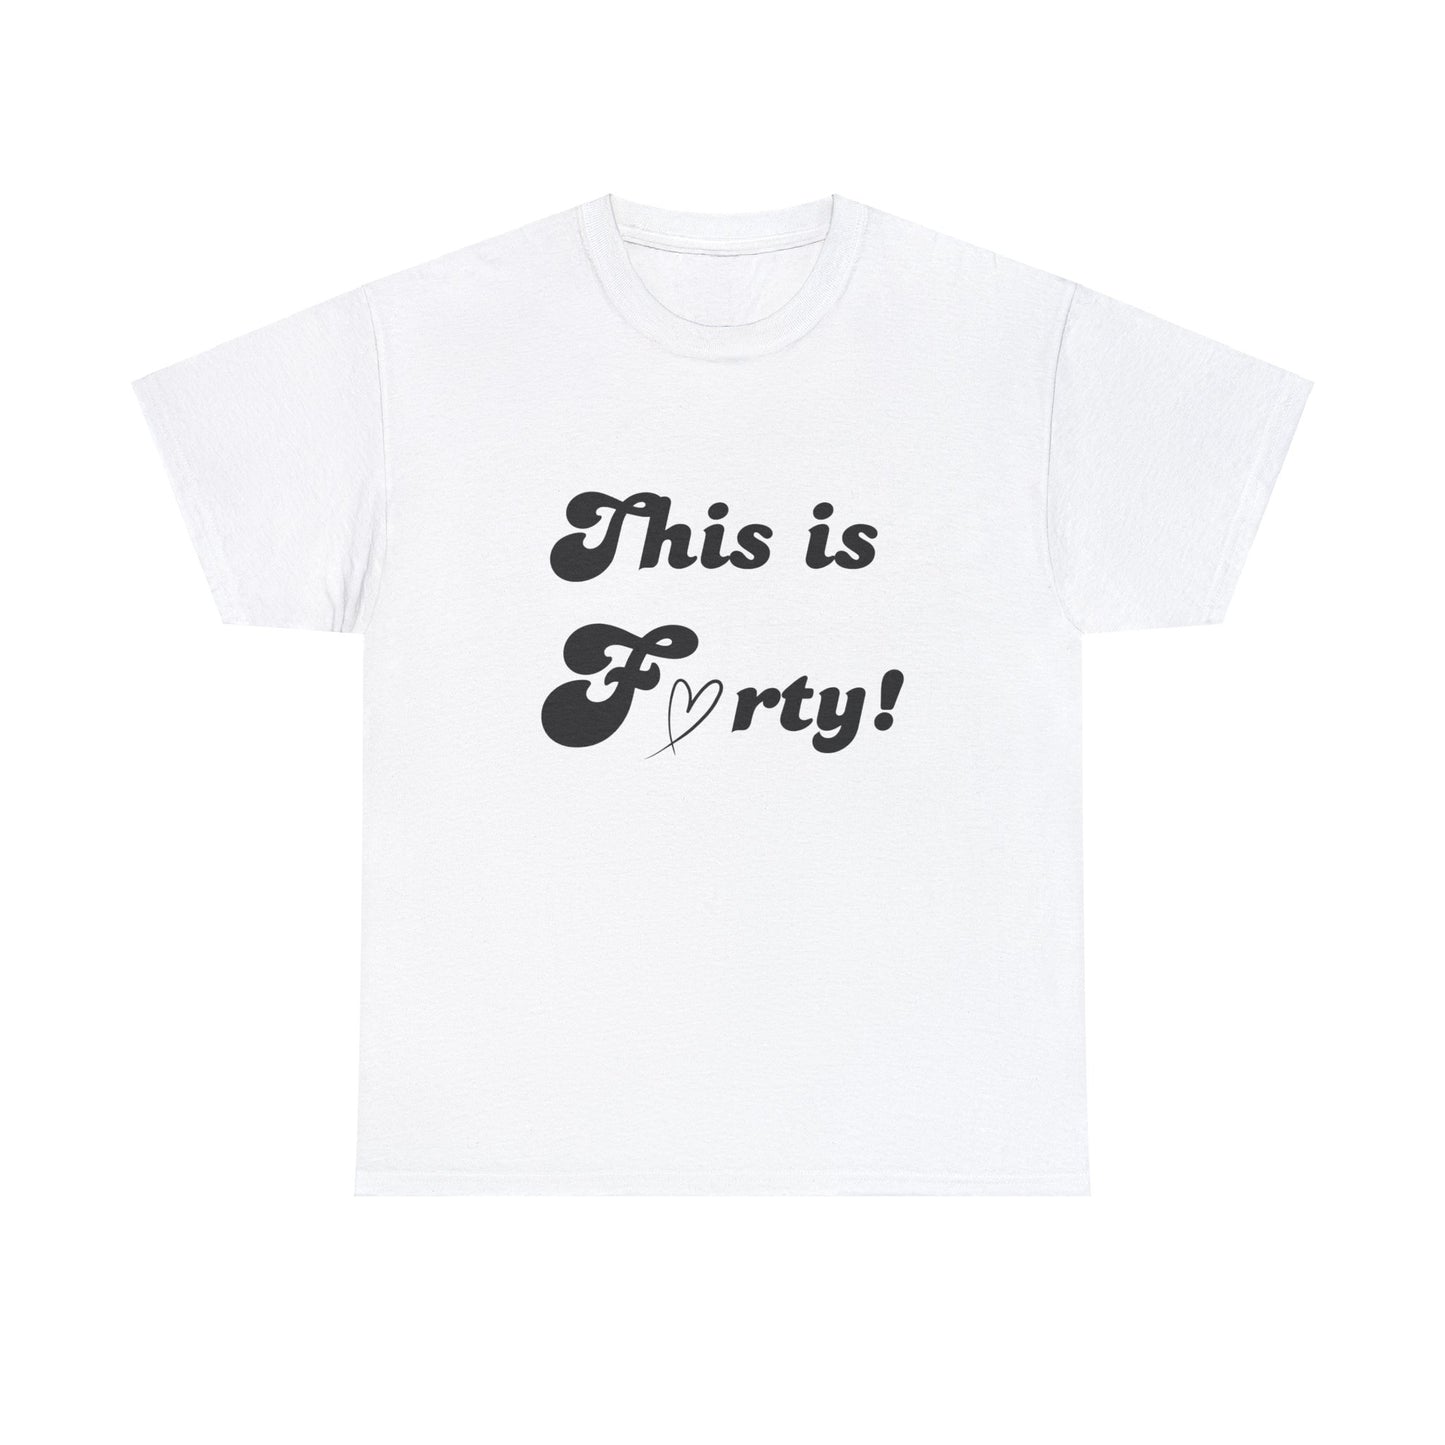 This is Forty Tshirt - 40th Birthday Tee